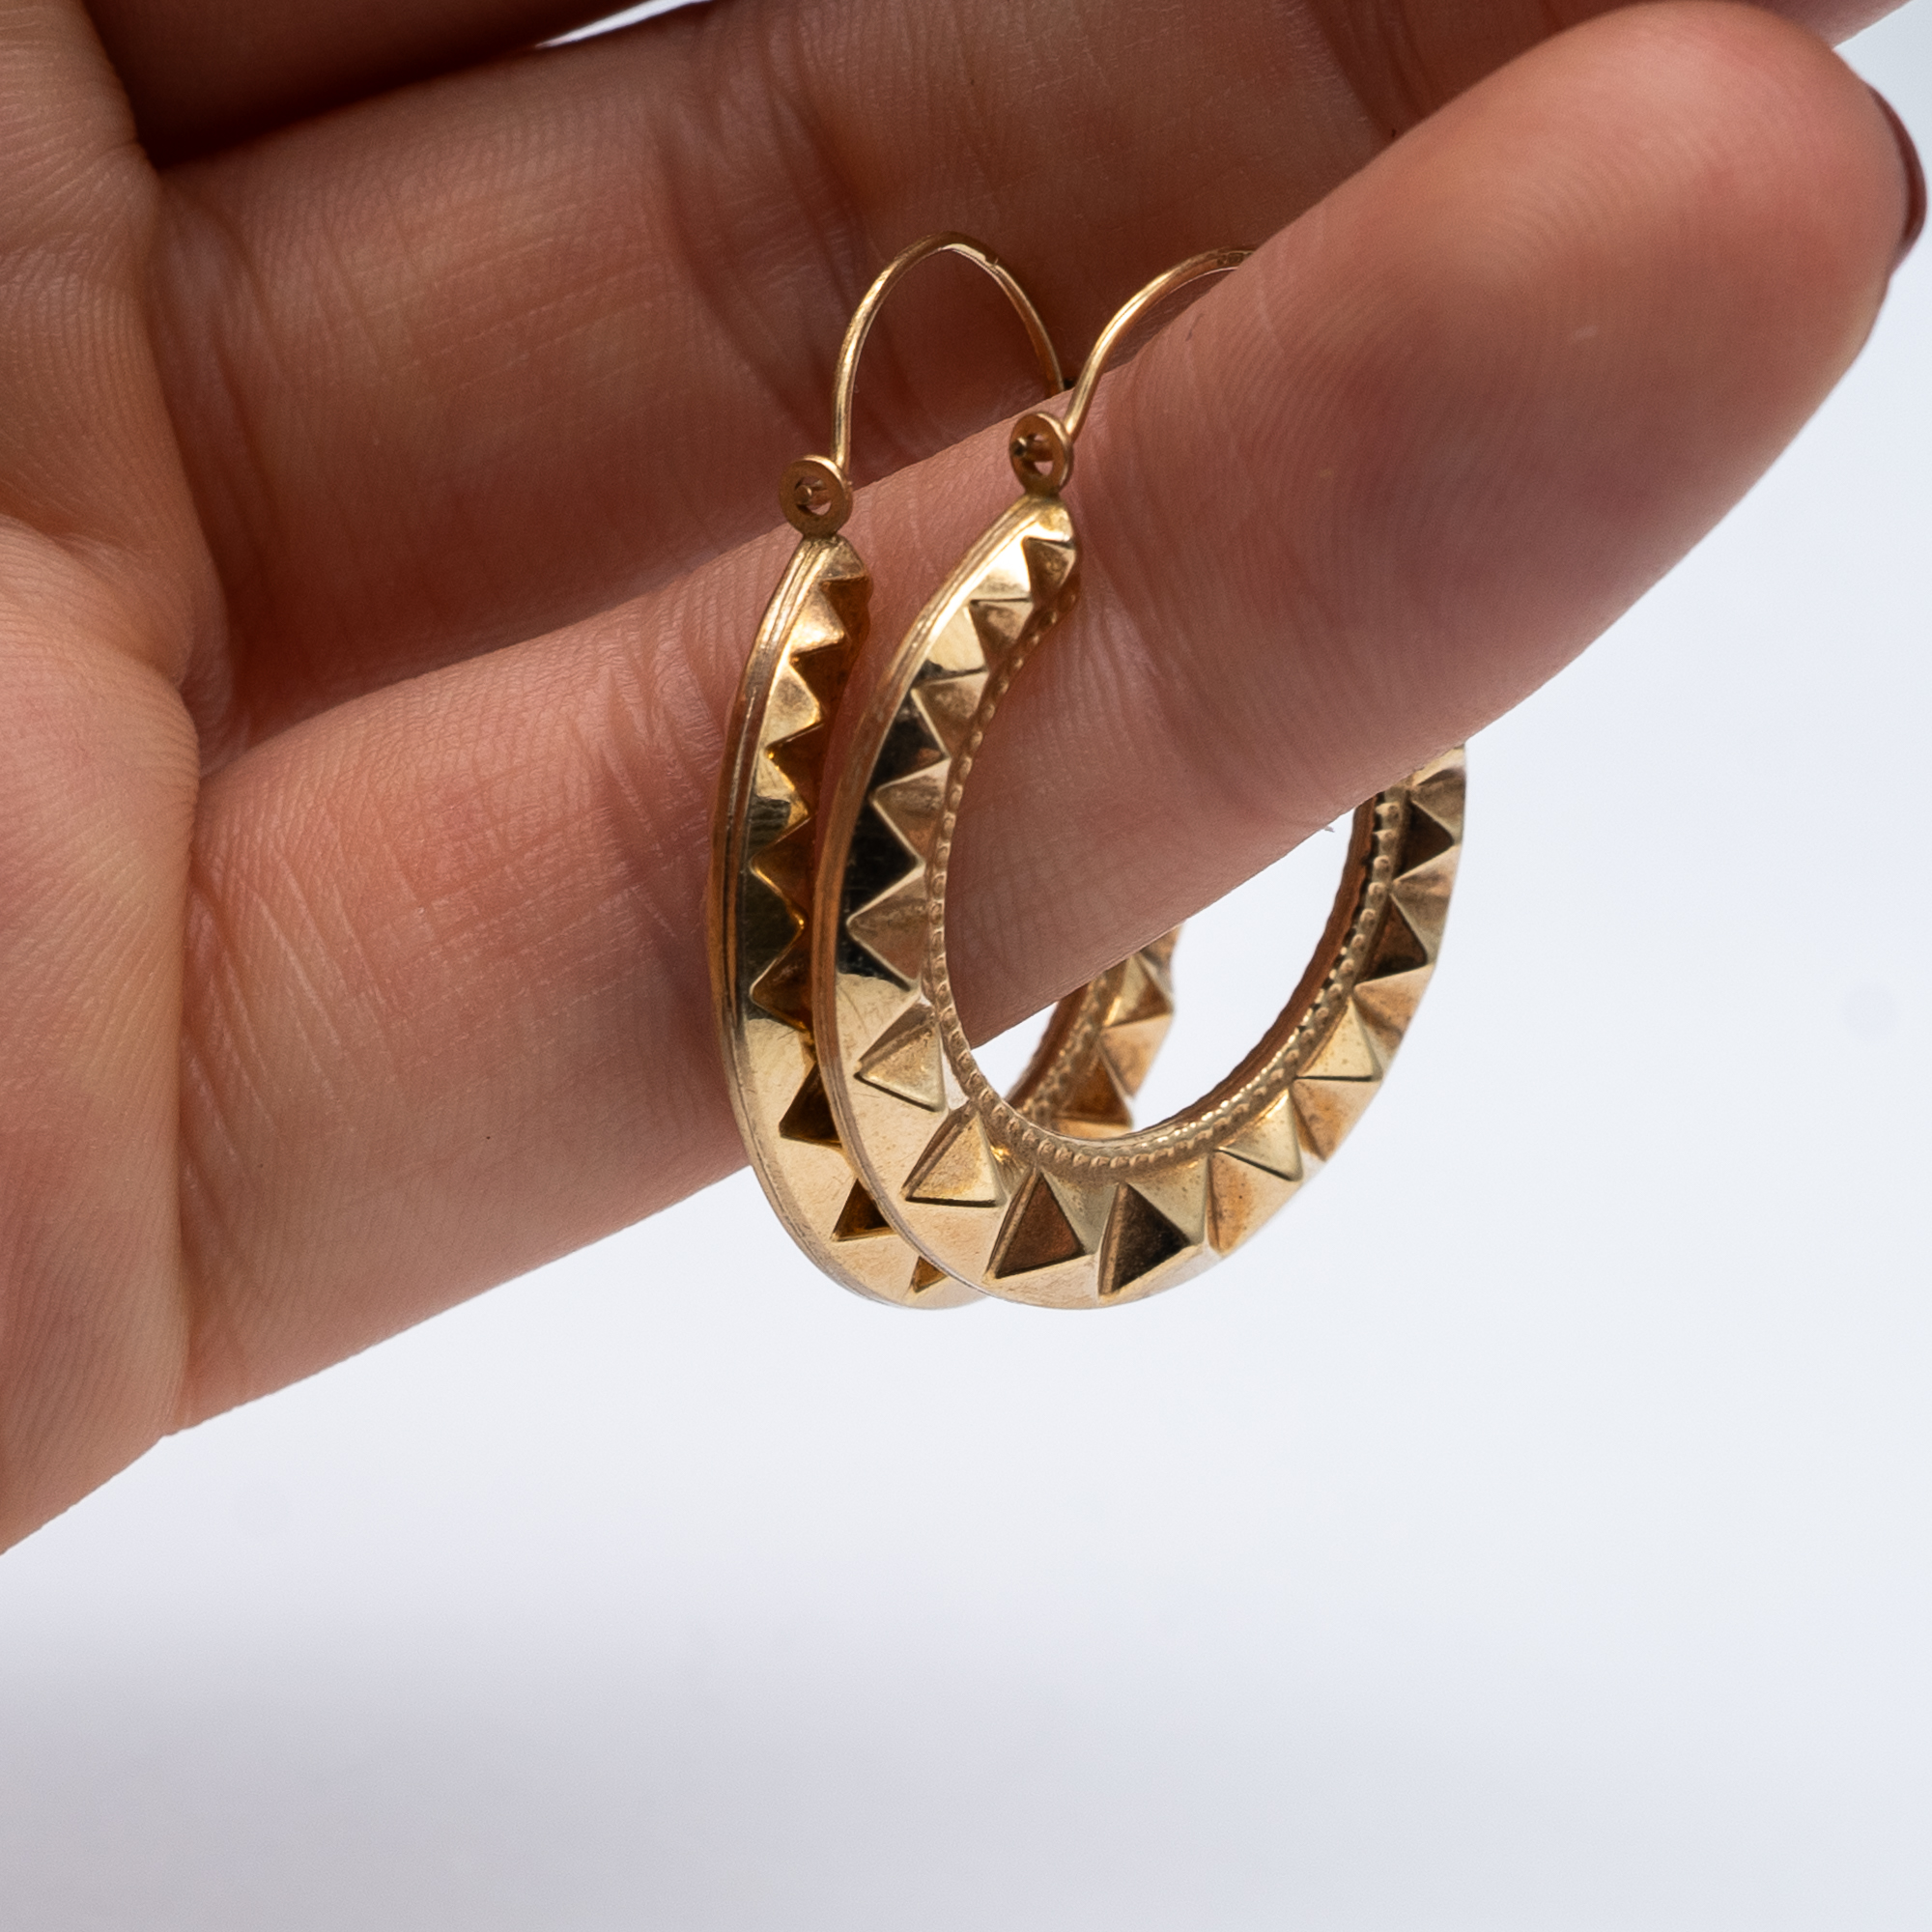 A pair of 9ct yellow gold pyramid cut earrings - Image 4 of 4